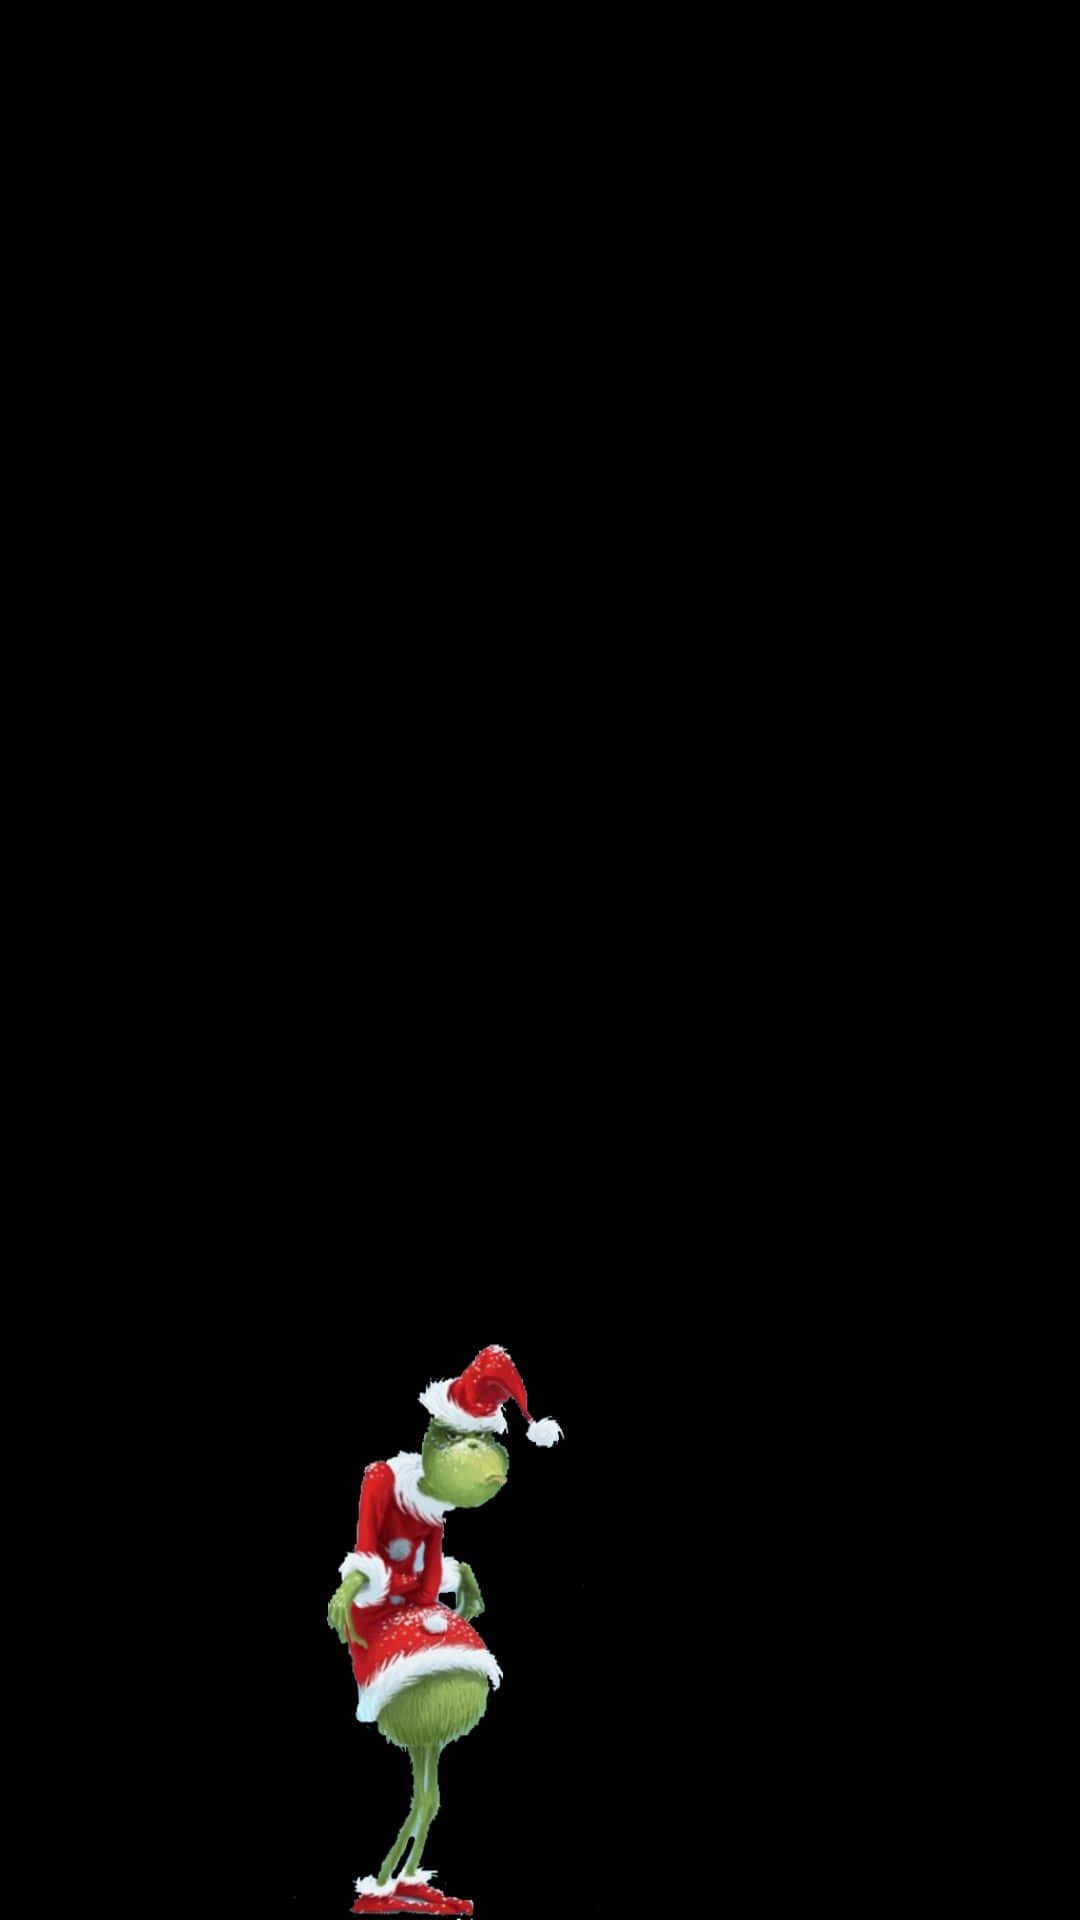 Add a touch of humor to your Christmas celebrations with this funny iPhone wallpaper Wallpaper